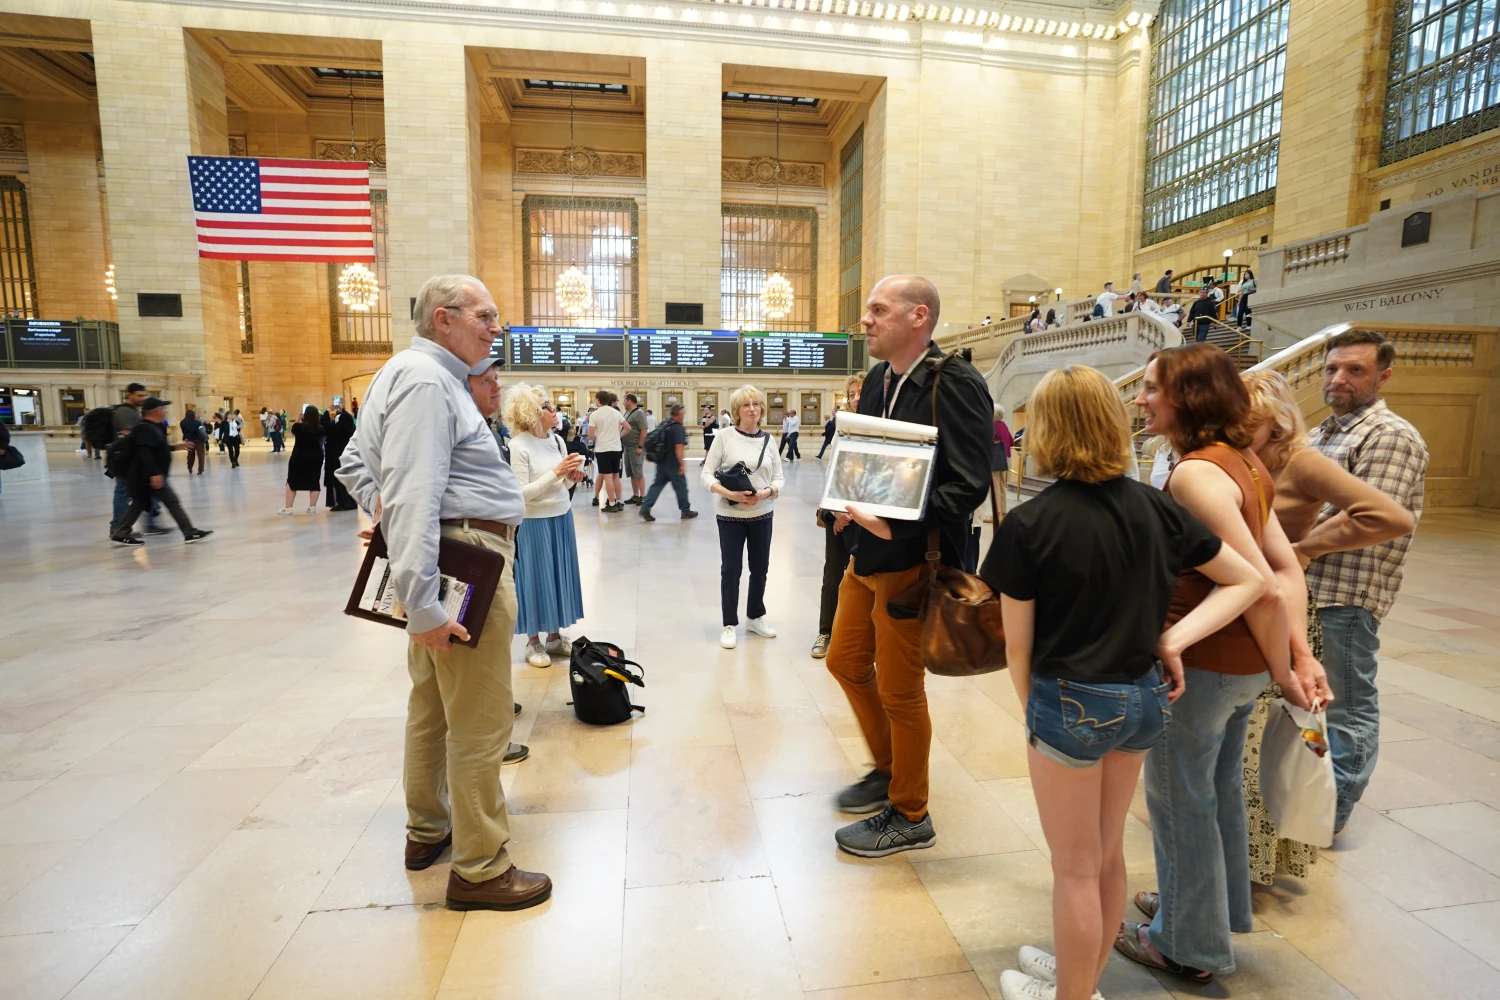 Secrets of Grand Central Tour: What to expect - 1